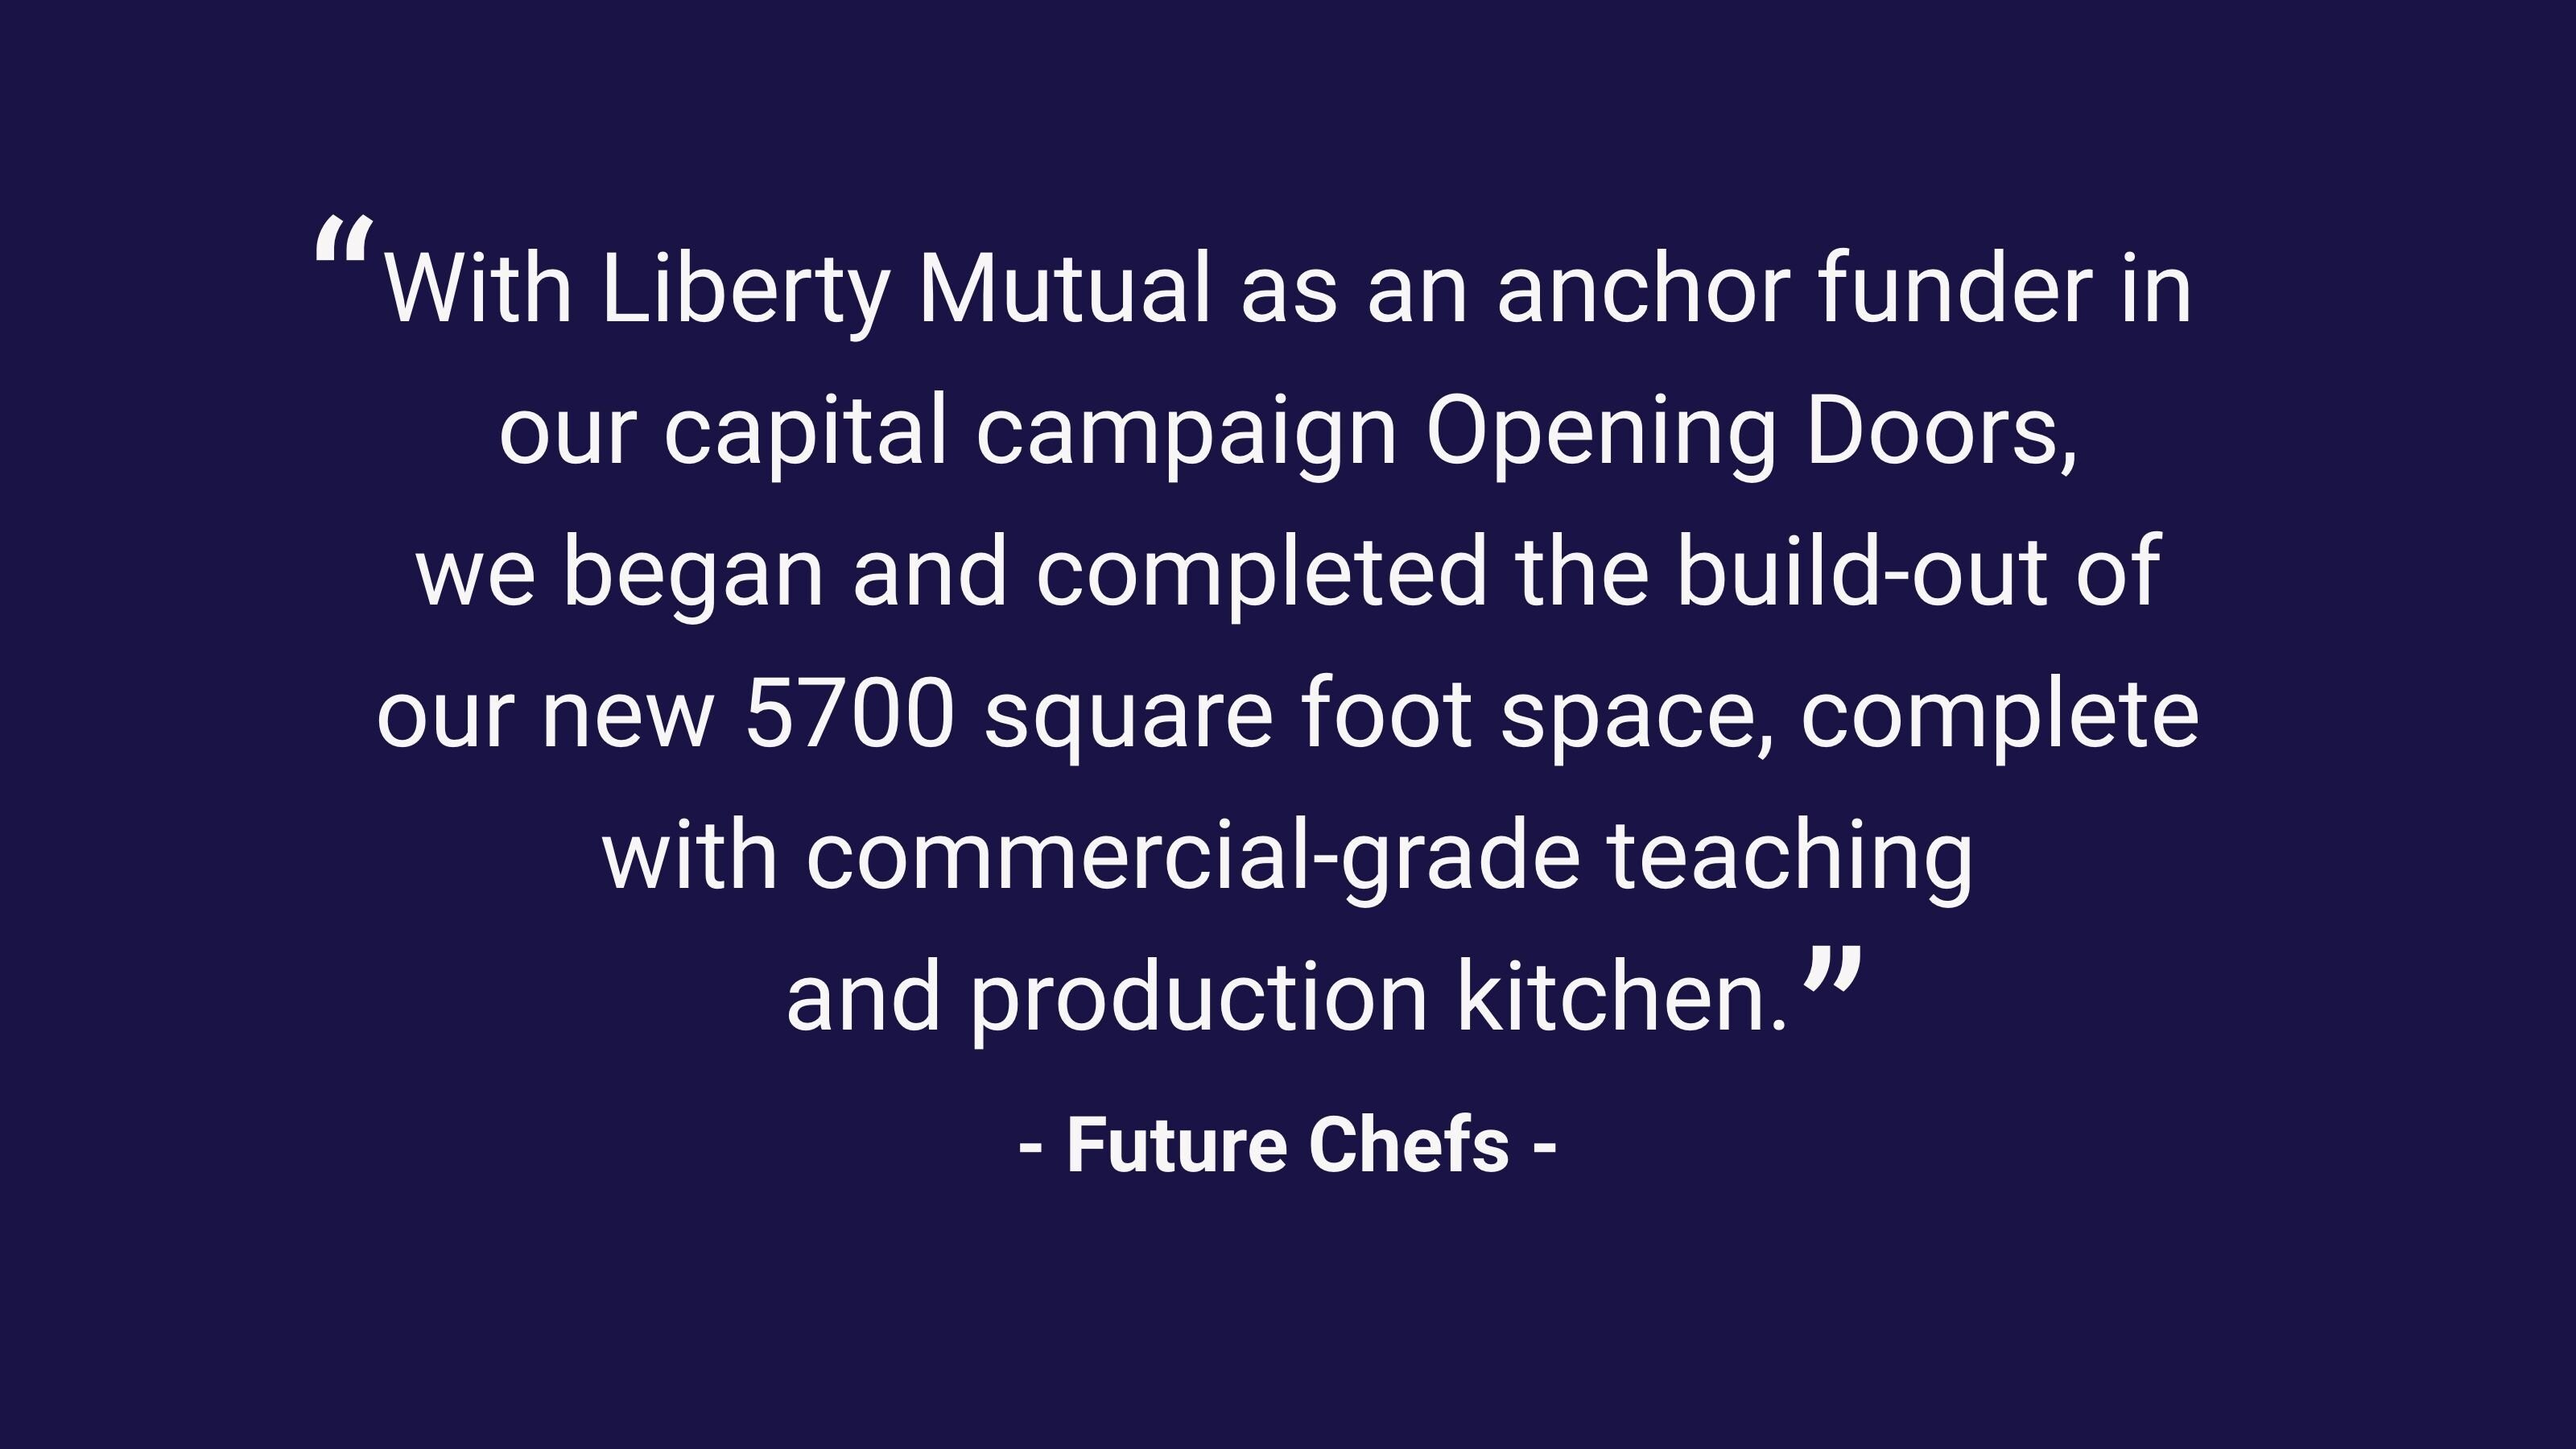 (slide 1 of 3) “With Liberty Mutual as an anchor funder in our capital campaign Opening Doors, we began and completed the build-out of our new 5700 square foot space, complete with commercial-grade teaching and production kitchen.” –Future Chefs. 